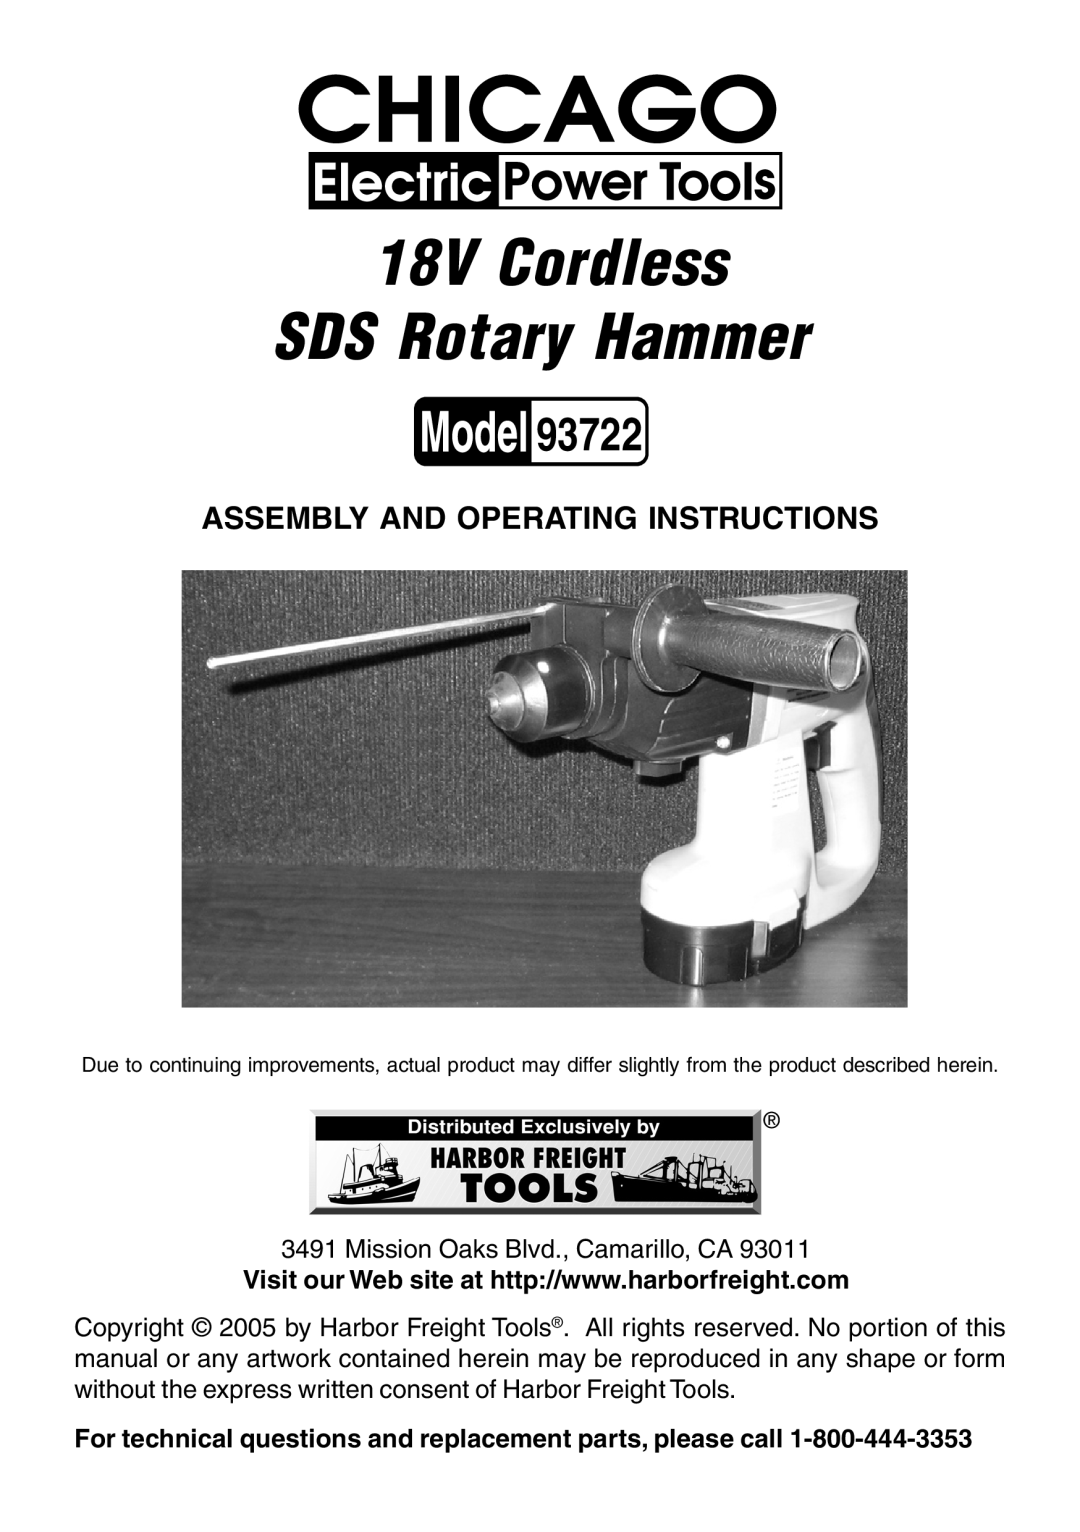 Harbor Freight Tools 93722 operating instructions Assembly And Operating Instructions, 18V Cordless SDS Rotary Hammer 